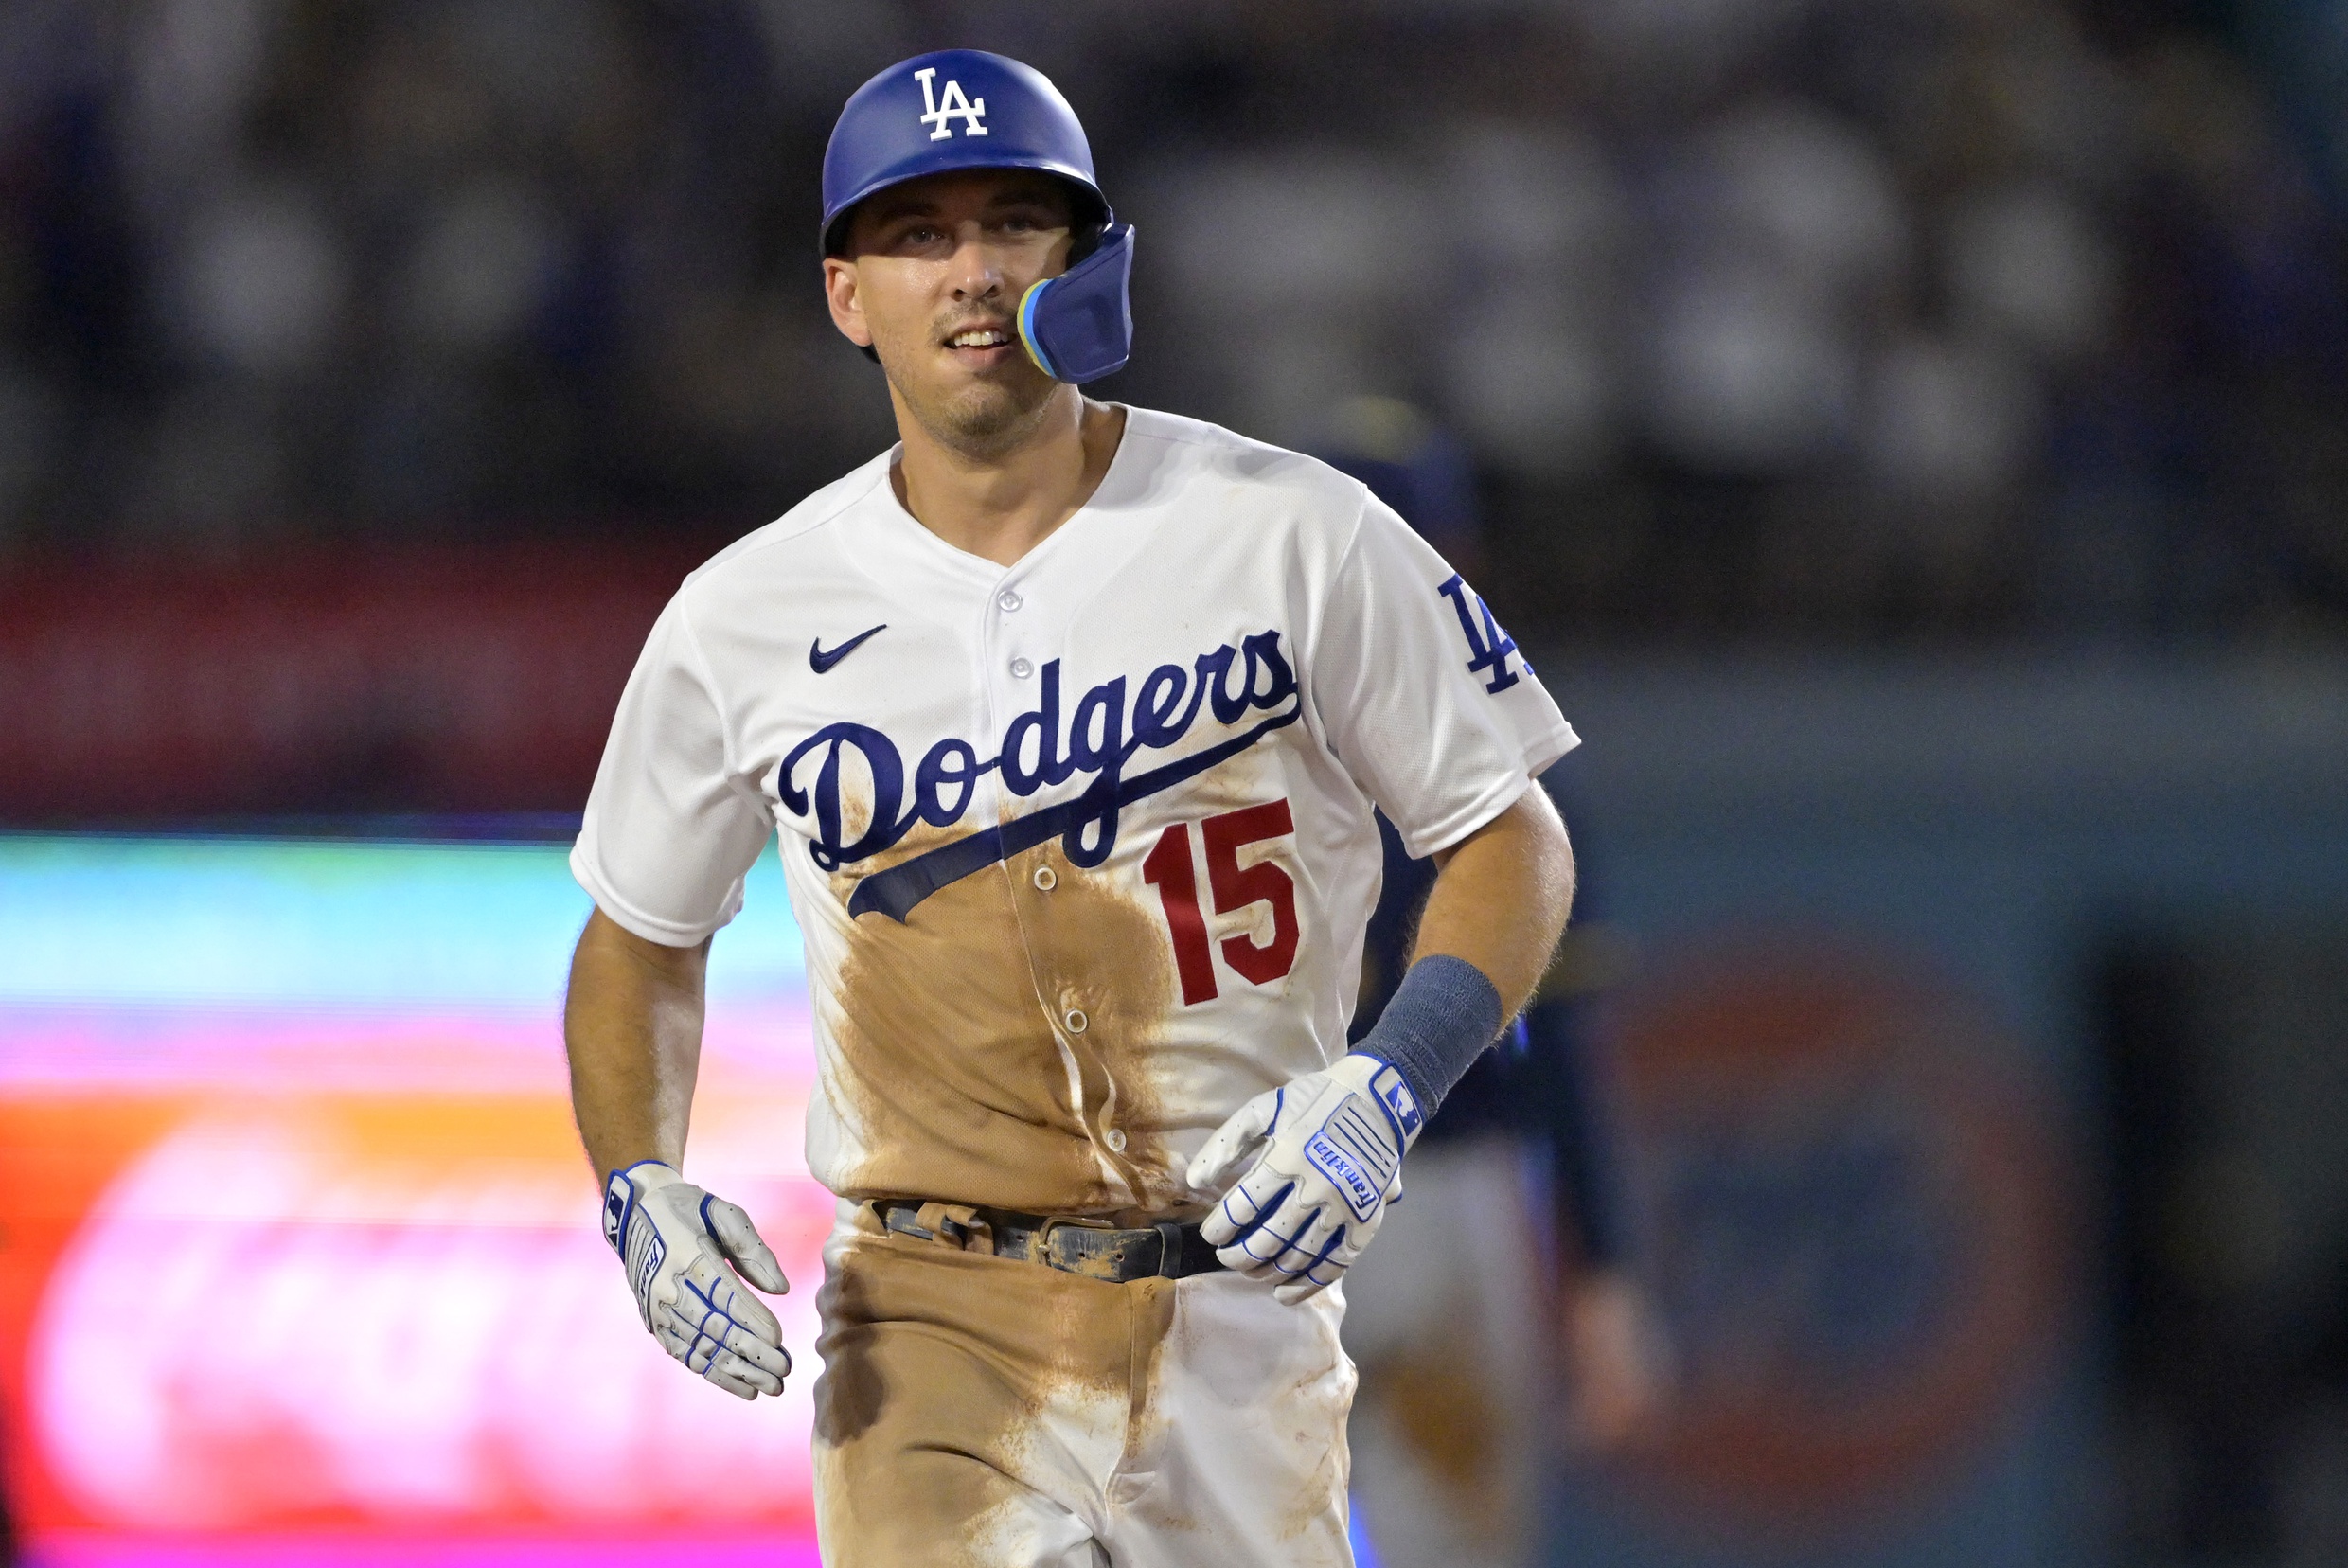 Dodgers News: Austin Barnes Forced to Exit Tuesday's Game Early After Vicious Blow to Head